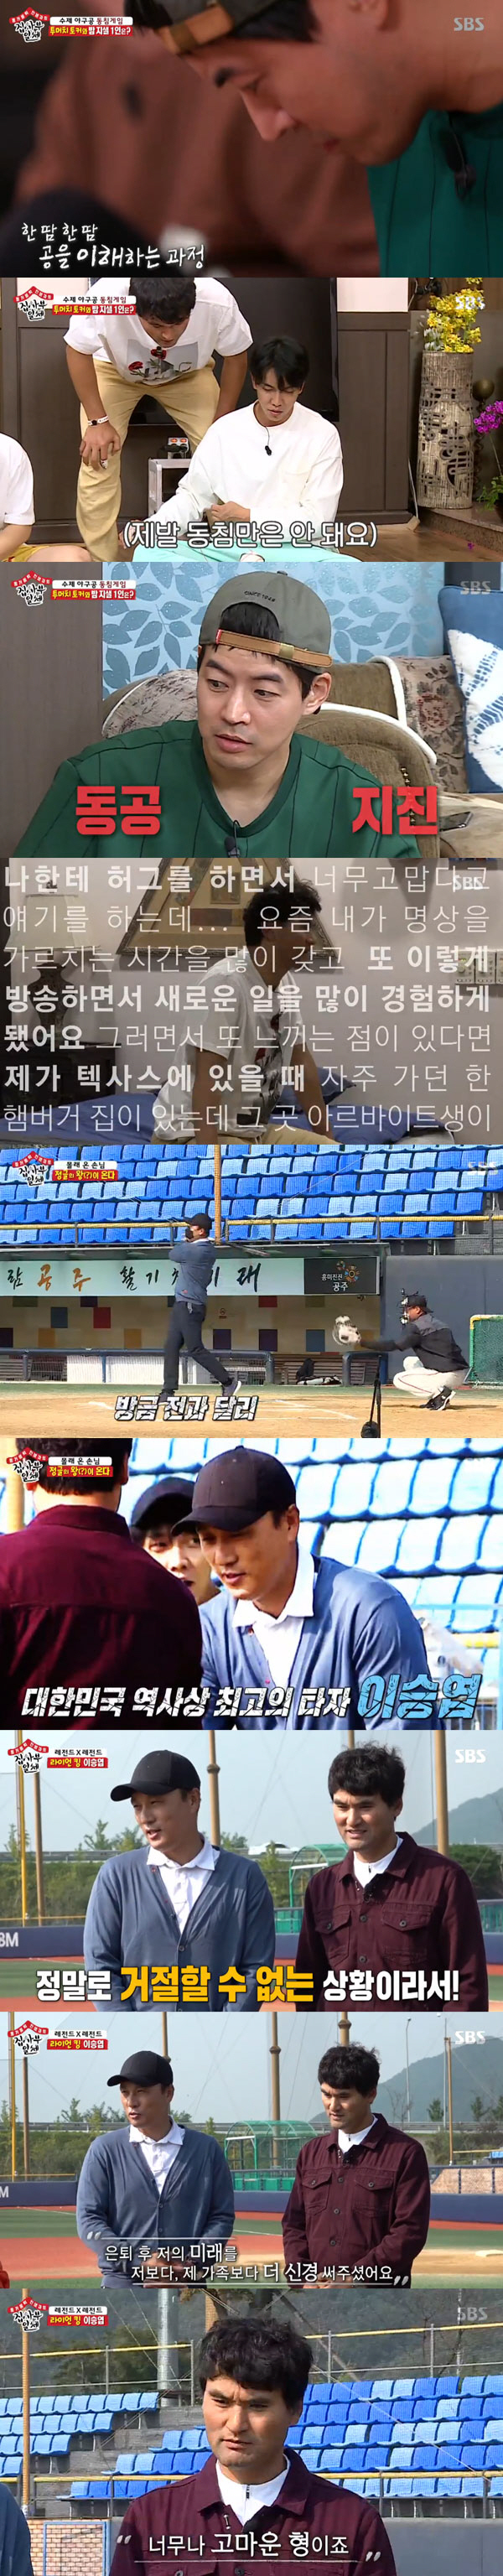 All The Butlers Chan Ho Park and Lee Seung-yeops Legend Match were unfolded.SBS All The Butlers Lee Seung-gi and Lee Sang-yoon, Yook Sungjae and Yang Se-hyeong, who were broadcast on the 27th, spent Haru in Princess Chan Ho Parks roots.The rising figure was picked up by the training tool, Kumho Tire, and headed somewhere, where the boy Chanho lived, an alley, a staircase, and a rabbit training course.Chan Ho Park said, I dragged Kumho Tire from the slope to the hill and made 10 round trips every night. I have never walked up to my house.I went on a duck step because I was running out of time, she recalled.At that time, Chan Ho Park suggested, I will give you a handwritten sign ball if you do not get up and finish among Lee Sang-yoon and Yook Sungjae, two rabbits. Lee Sang-yoon and Yook Sungjae burned their motivation.The Masters house is now a memorial hall, and the space where memories of the young mans chants were built has become a place to remember legends.In 1991, Chan Ho Park said, Exercise, which is peeled every day, is demonstration, but I think it is the right way to overcome it.I will do it no matter what difficulties I have for my goal, my future. He wrote, Please help me God. The boys desperate prayer became the beginning of history and the hope of the desperate people.Chan Ho Park said: There is a passion when there is patience; the fruits of patience and effort are one more than I did and that makes me feel more confident.Then I headed to the hostel. Then Chan Ho Park tried to talk to someone, saying, I came to the princess and talked to someone.He was none other than a Pak Se-ri player.Lee Seung-gi said, When I came to see the princess and met someone, I came up with Chan Ho Park and Pak Se-ri. I wanted to meet Pak Se-ri personally.So Pak Se-ri shivered, Im very expensive, will you be okay?Pak Se-ri said: You made it to United States of America before me; its not easy for an Exercise player to play abroad in Korea at the time.I did not see each others faces in a lonely foreign life, but I was comforted by the news. After the call, Chan Ho Park said, I talked less today, and I want to talk again while sleeping with Haru routine.To set up a member to sleep with Master Chan Ho Park, he performed a game called Baseball Sewing.Lee Seung-gi, usually called passion victory, strongly denied no as soon as Chan Ho Parks praise of good ended, making everyone laugh.Since then, Chan Ho Park has decided to Lee Sang-yoon as a sleeping person, saying, Mr.The next morning, Master and the rising figure headed to Baseball: Princess Citys Chan Ho Park Baseball.At that time, a special guest appeared, Legend batter Lee Seung-yeop.Lee Seung-yeop said, Its been a long time since I appeared on the show. Its very awkward. However, I was not able to refuse as a junior because I was helped by Chan Ho.Lee Seung-yeop said, Chan Ho-hyung will take off his feet if his juniors are in trouble. I retired and cared more about my future than my family.Lee Seung-yeop also said, I was also invited to the United States of America this time, and I have been learning advanced baseball.I am so grateful to you, he added.Since then, he has been divided into Chan Ho Park team and Lee Seung-yeop team.The Chan Ho Park team was Lee Seung-gi and Yang Se-hyeong, and Lee Seung-yeop was Lee Sang-yoon and Yook Sungjae.Chan Ho Park and Lee Seung-yeop conducted one-on-one tweezers tutoring for the members; each team in the third round had a one-on-one match.The first-rounders were Yook Sungjae and Chan Ho Park; the result was a victory for Chan Ho Park.The runner-up was Lee Sang-yoon vs. Yang Se-chan.Lee Sang-yoon was swinging after checking the balls trajectory, but Yang Se-hyeong, who pinpointed the balls position, was the winner of Yang Se-hyeong by catching the ball.The last showdown was Lee Seung-yeop vs Lee Seung-gi.The last ball left Lee Seung-gis hand as the game ended when Lee Seung-gi grabbed another Strike.Lee Seung-yeops perfect hit, but Yang Se-hyeong took the ball and was the victory of Chan Ho Park team.Lee Seung-gi then proposed a confrontation between Chan Ho Park and Lee Seung-yeop, which Lee Seung-yeop accepted. Legend Match was concluded.The second was a right fast ball; now, if you have one Strike, Chan Ho Parks victory.The fourth ball left Chan Ho Parks hand, and the ball was a hit that rolled to the front of the fence.Lee Seung-yeop said, It was good to have a uniform with Chan-ho for a long time. Sports can spread good energy to many people.I hope you will watch not only Baseball but also many sports with interest. 